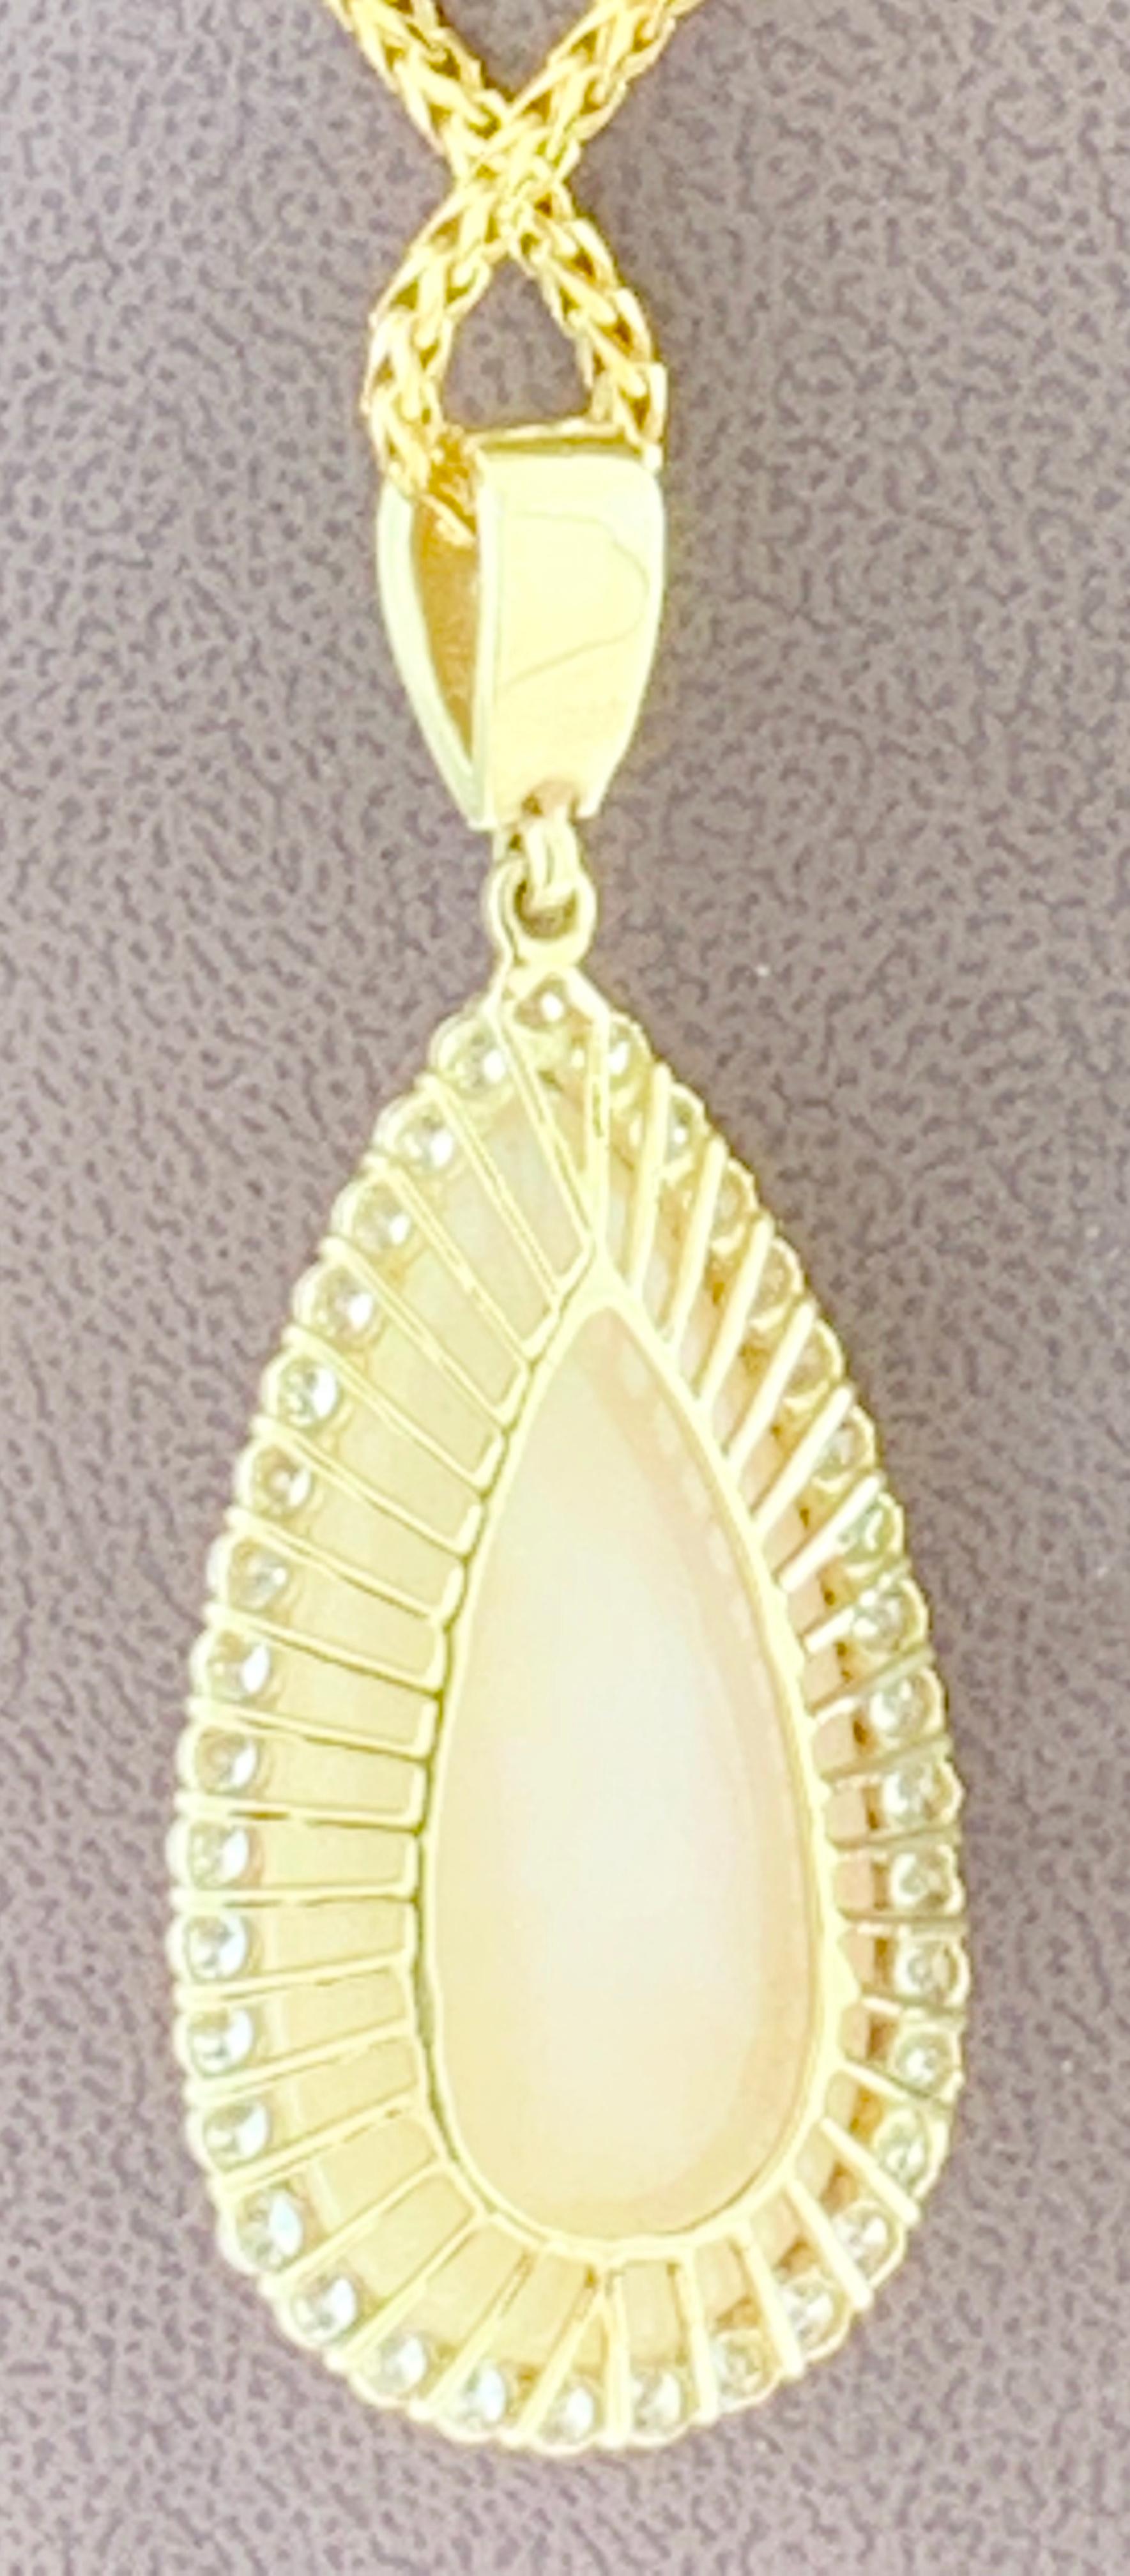  44 Carat  Pear Ethiopian  Opal &  Diamond Pendant /  Necklace 18 Karat yellow  Gold Estate
This spectacular Pendant Necklace  consisting of a single Pear  Shape Ethiopian  Opal Approximately 44 Carat.  The  Opal   is surrounded by approximately 